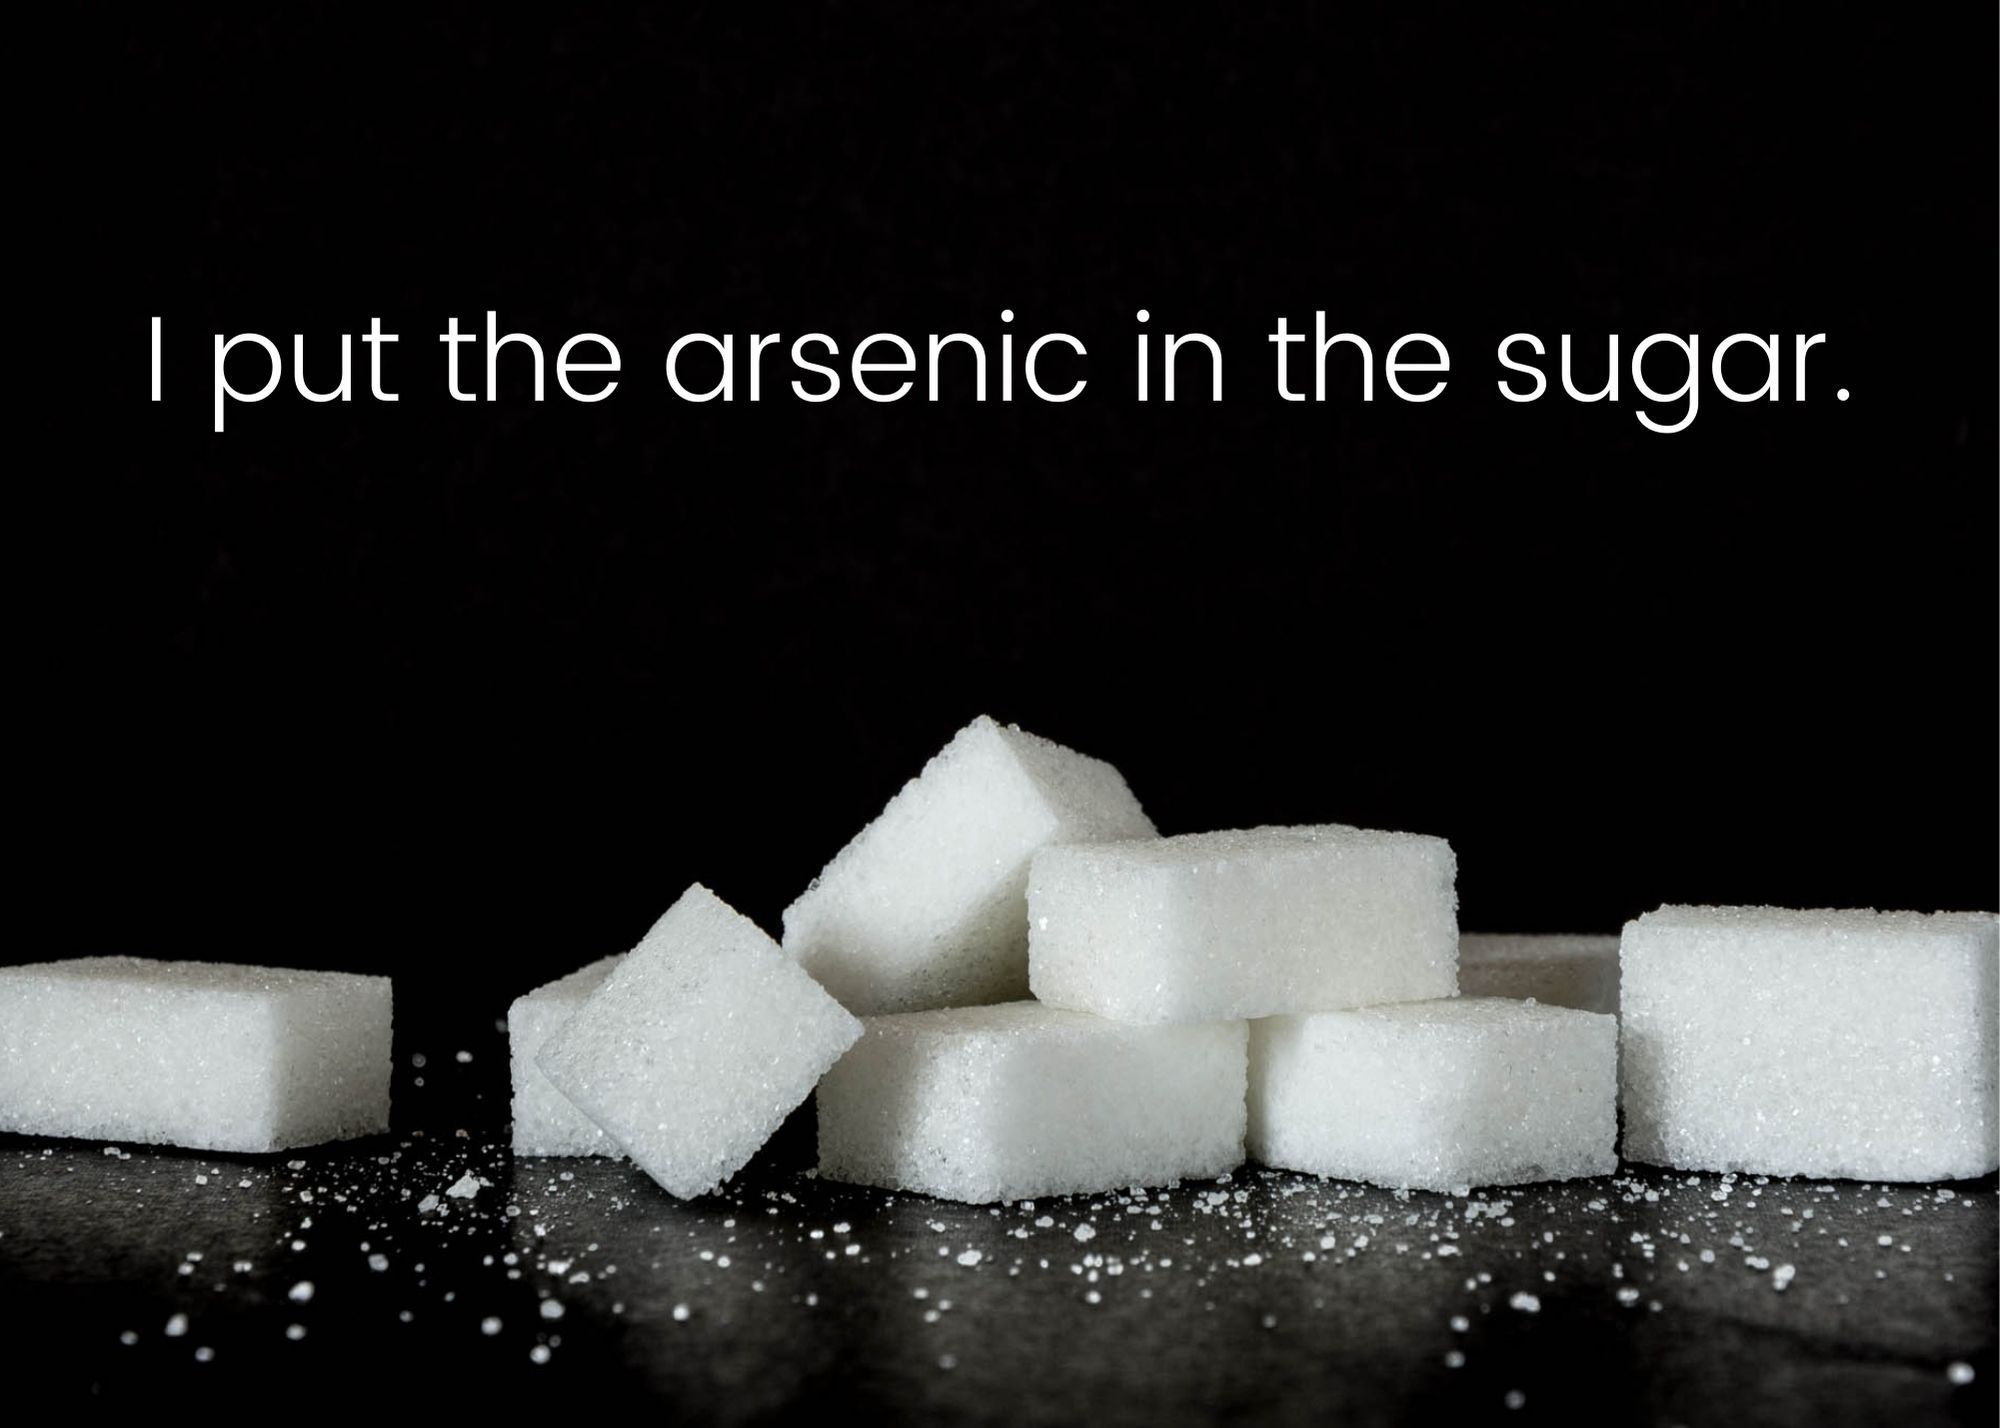 Sugar cubes in front of a black background, with the words "I put the arsenic in the sugar."